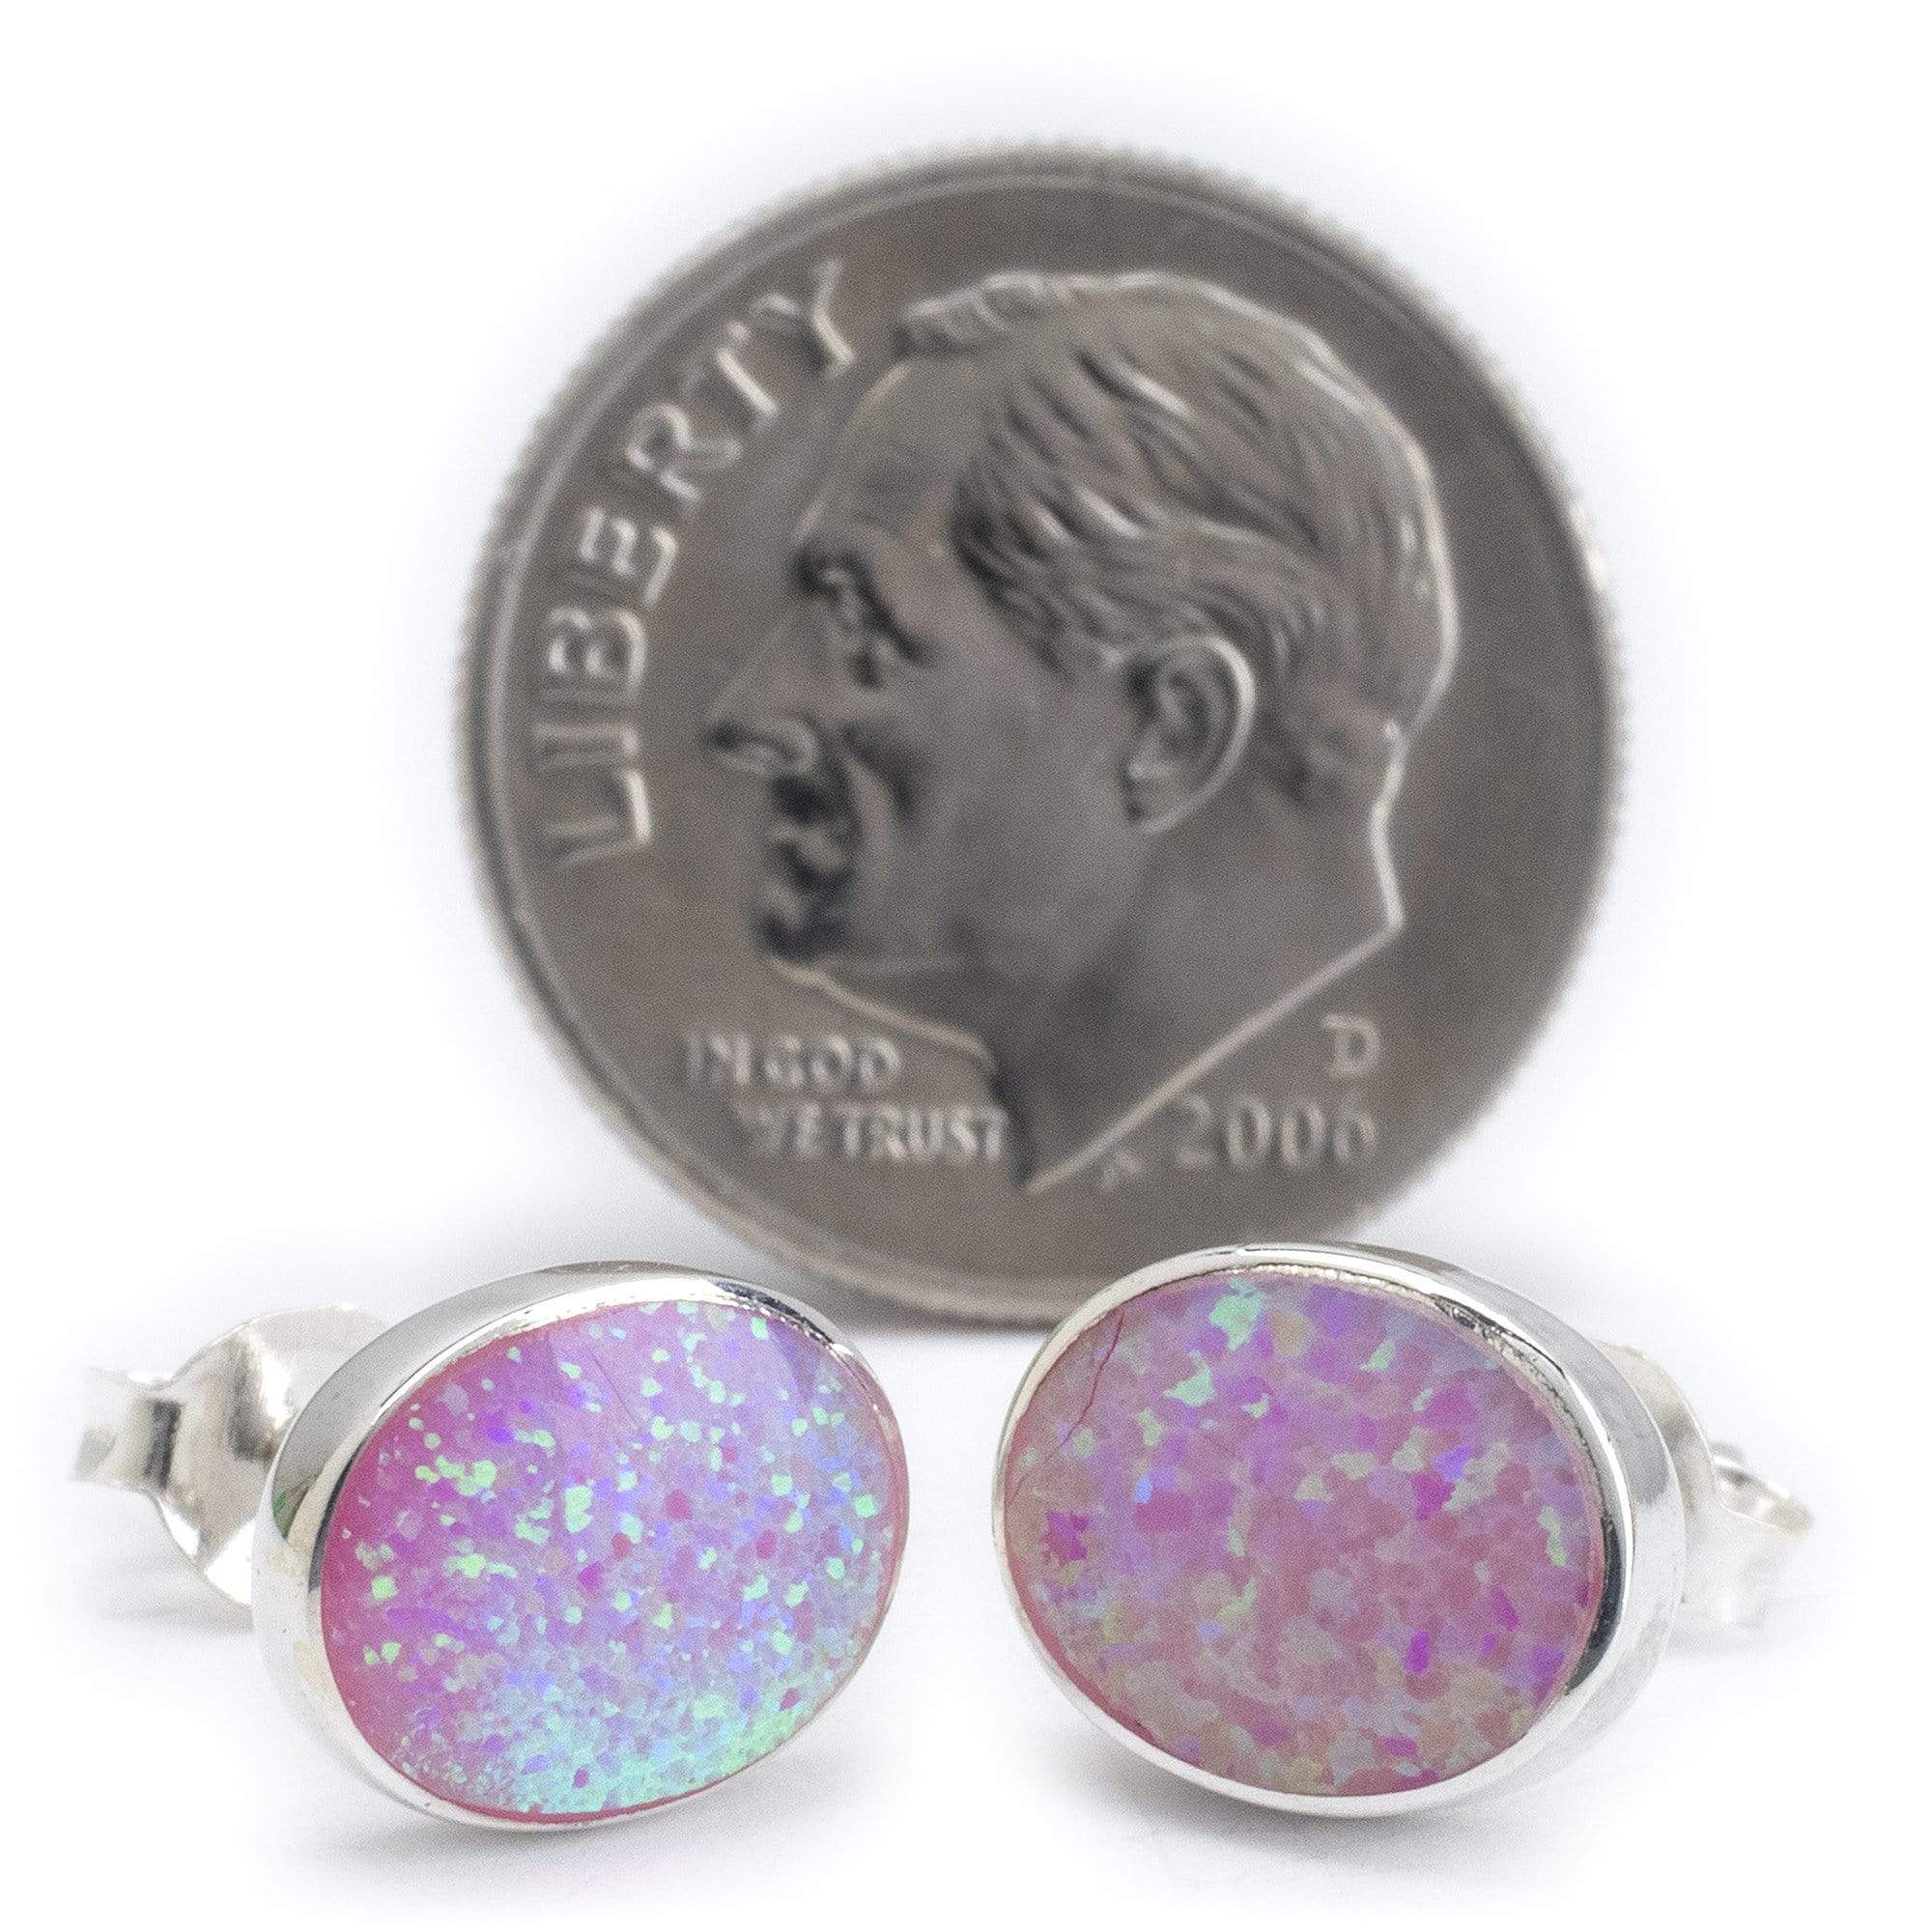 Kalifano Southwest Silver Jewelry Pink Opal Oval 925 Sterling Silver Earring with Stud Backing Handmade NME.0023.PO